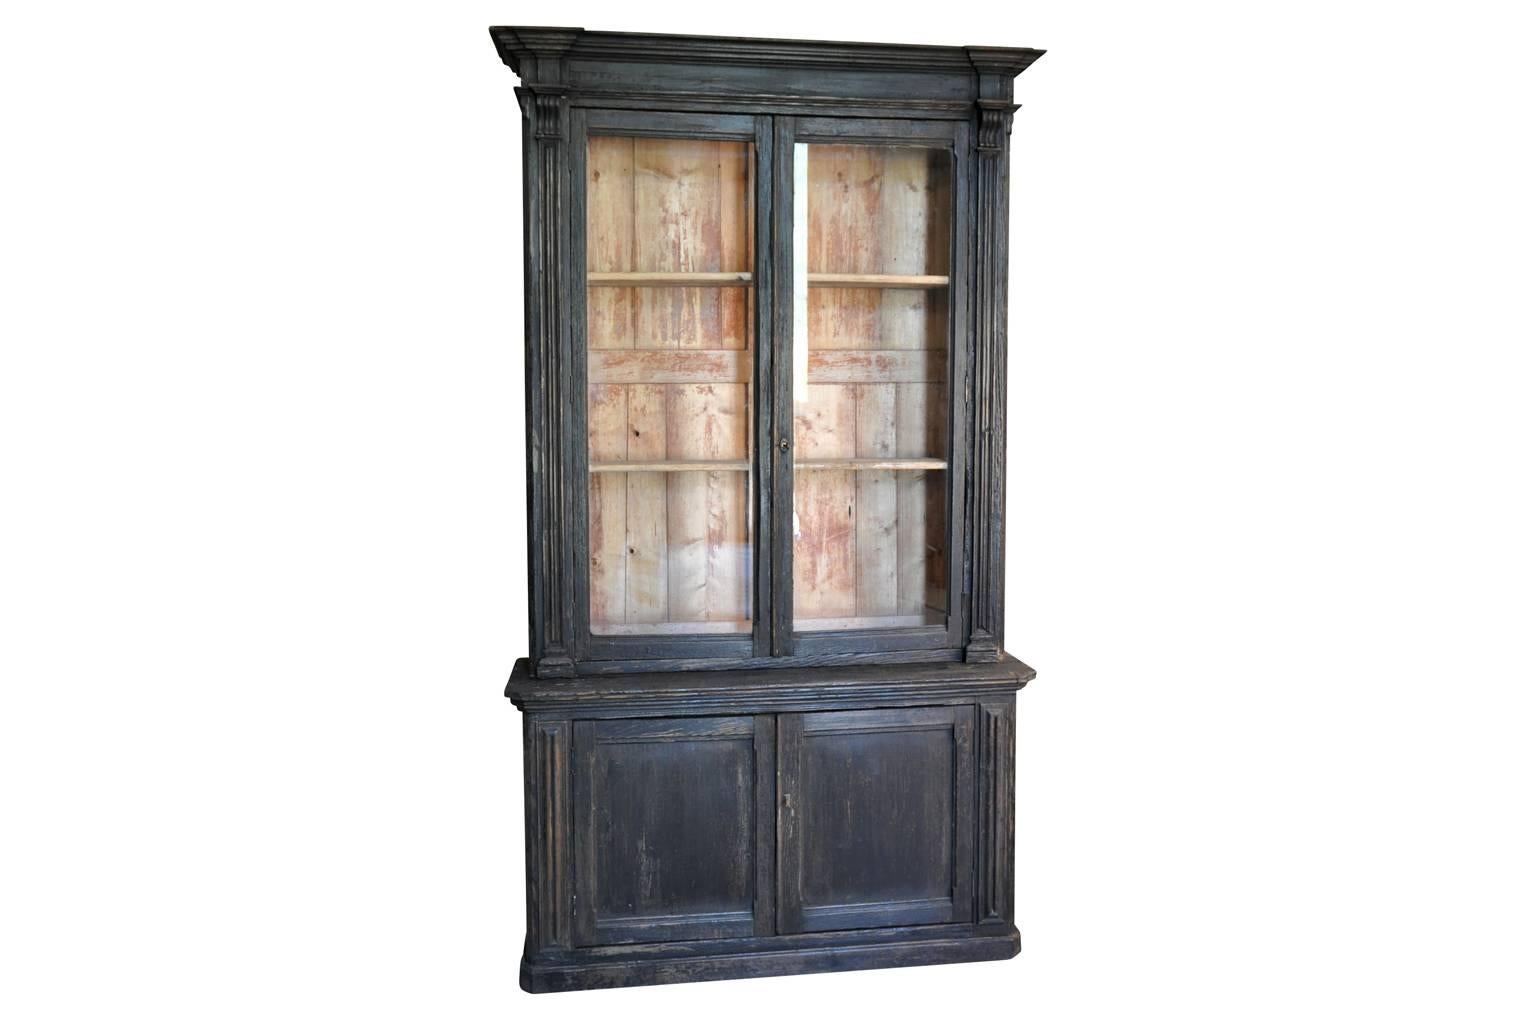 A very handsome mid-19th century Deux Corps Bibliotheque, bookcase from the South of France. Wonderfully constructed from painted wood with beautiful wavy glass panels. A great piece for display and storage. Wonderful in a kitchen or any living